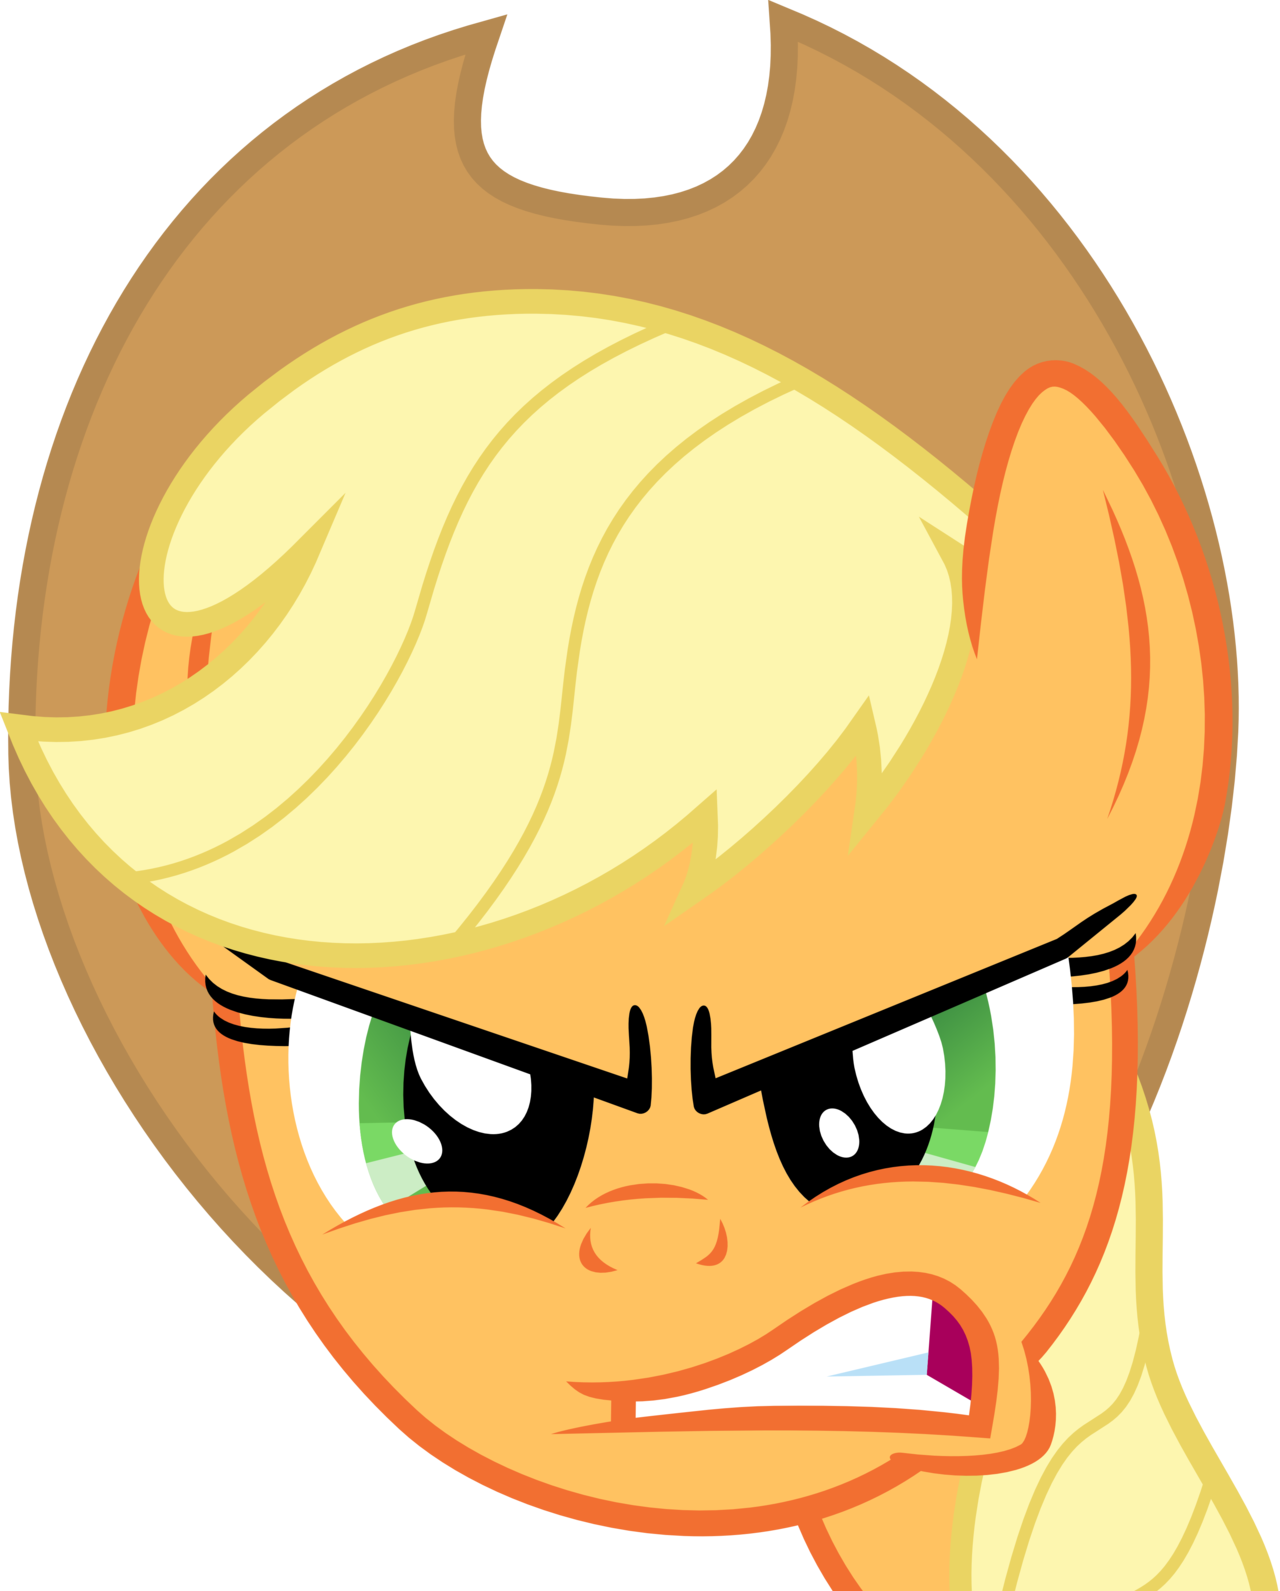 Applejack Angry By Mio94 - Angry My Little Pony Applejack.